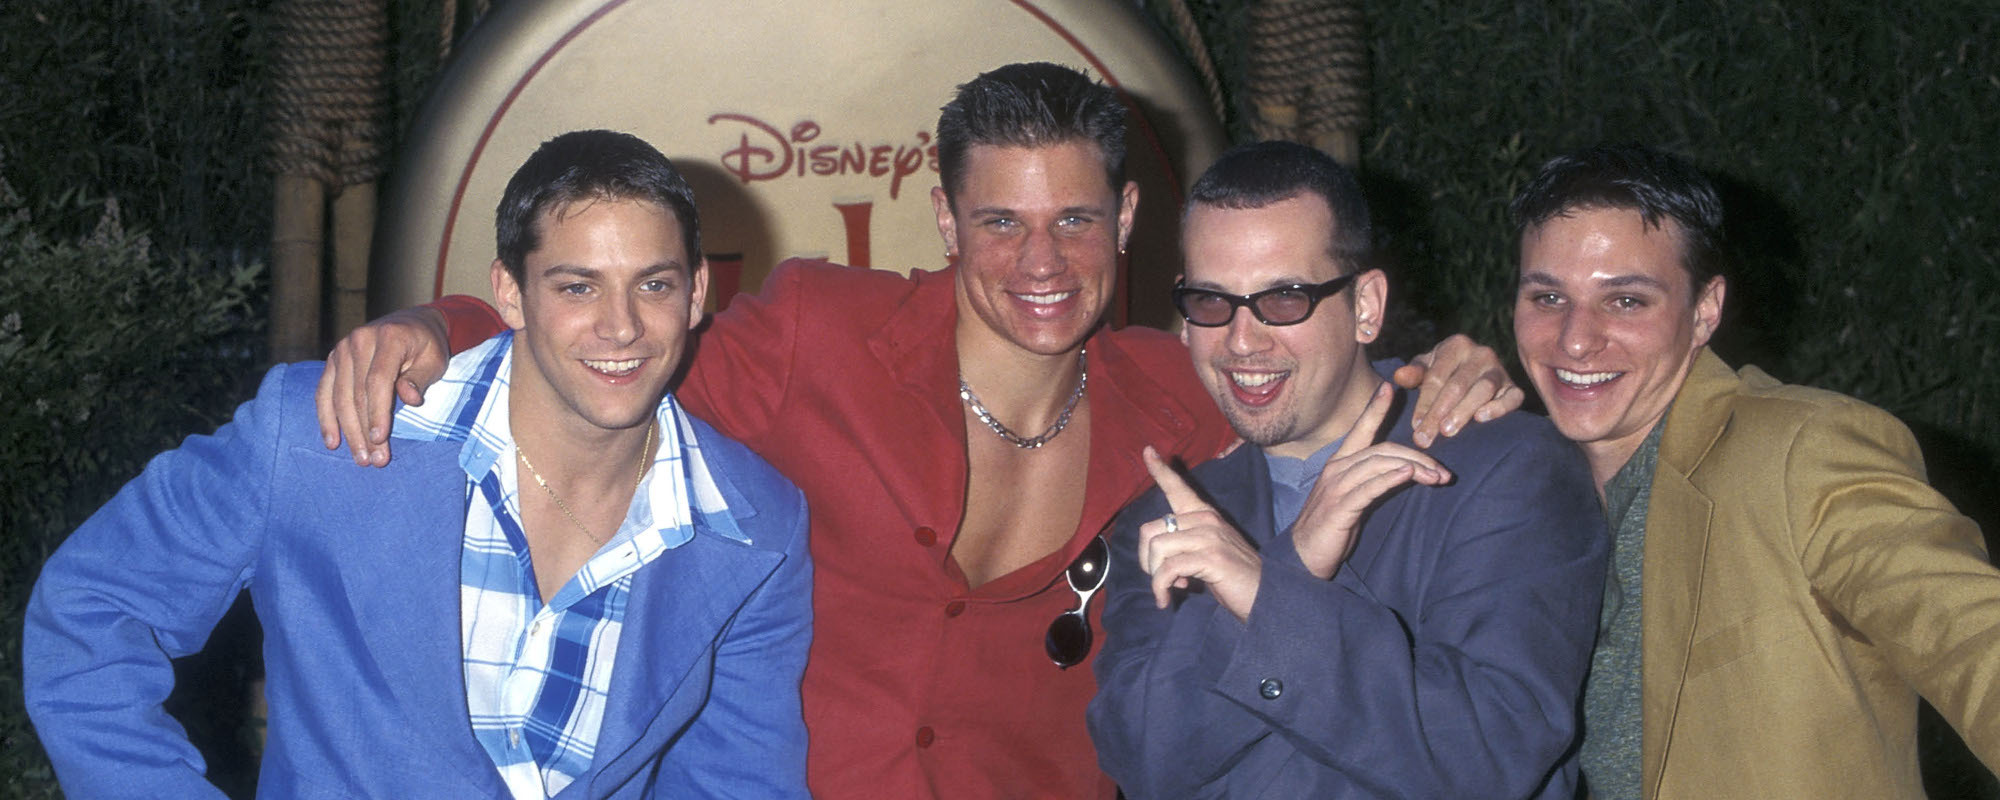 What Did 98 Degrees Get Up To After The Band? Politics, Stripping